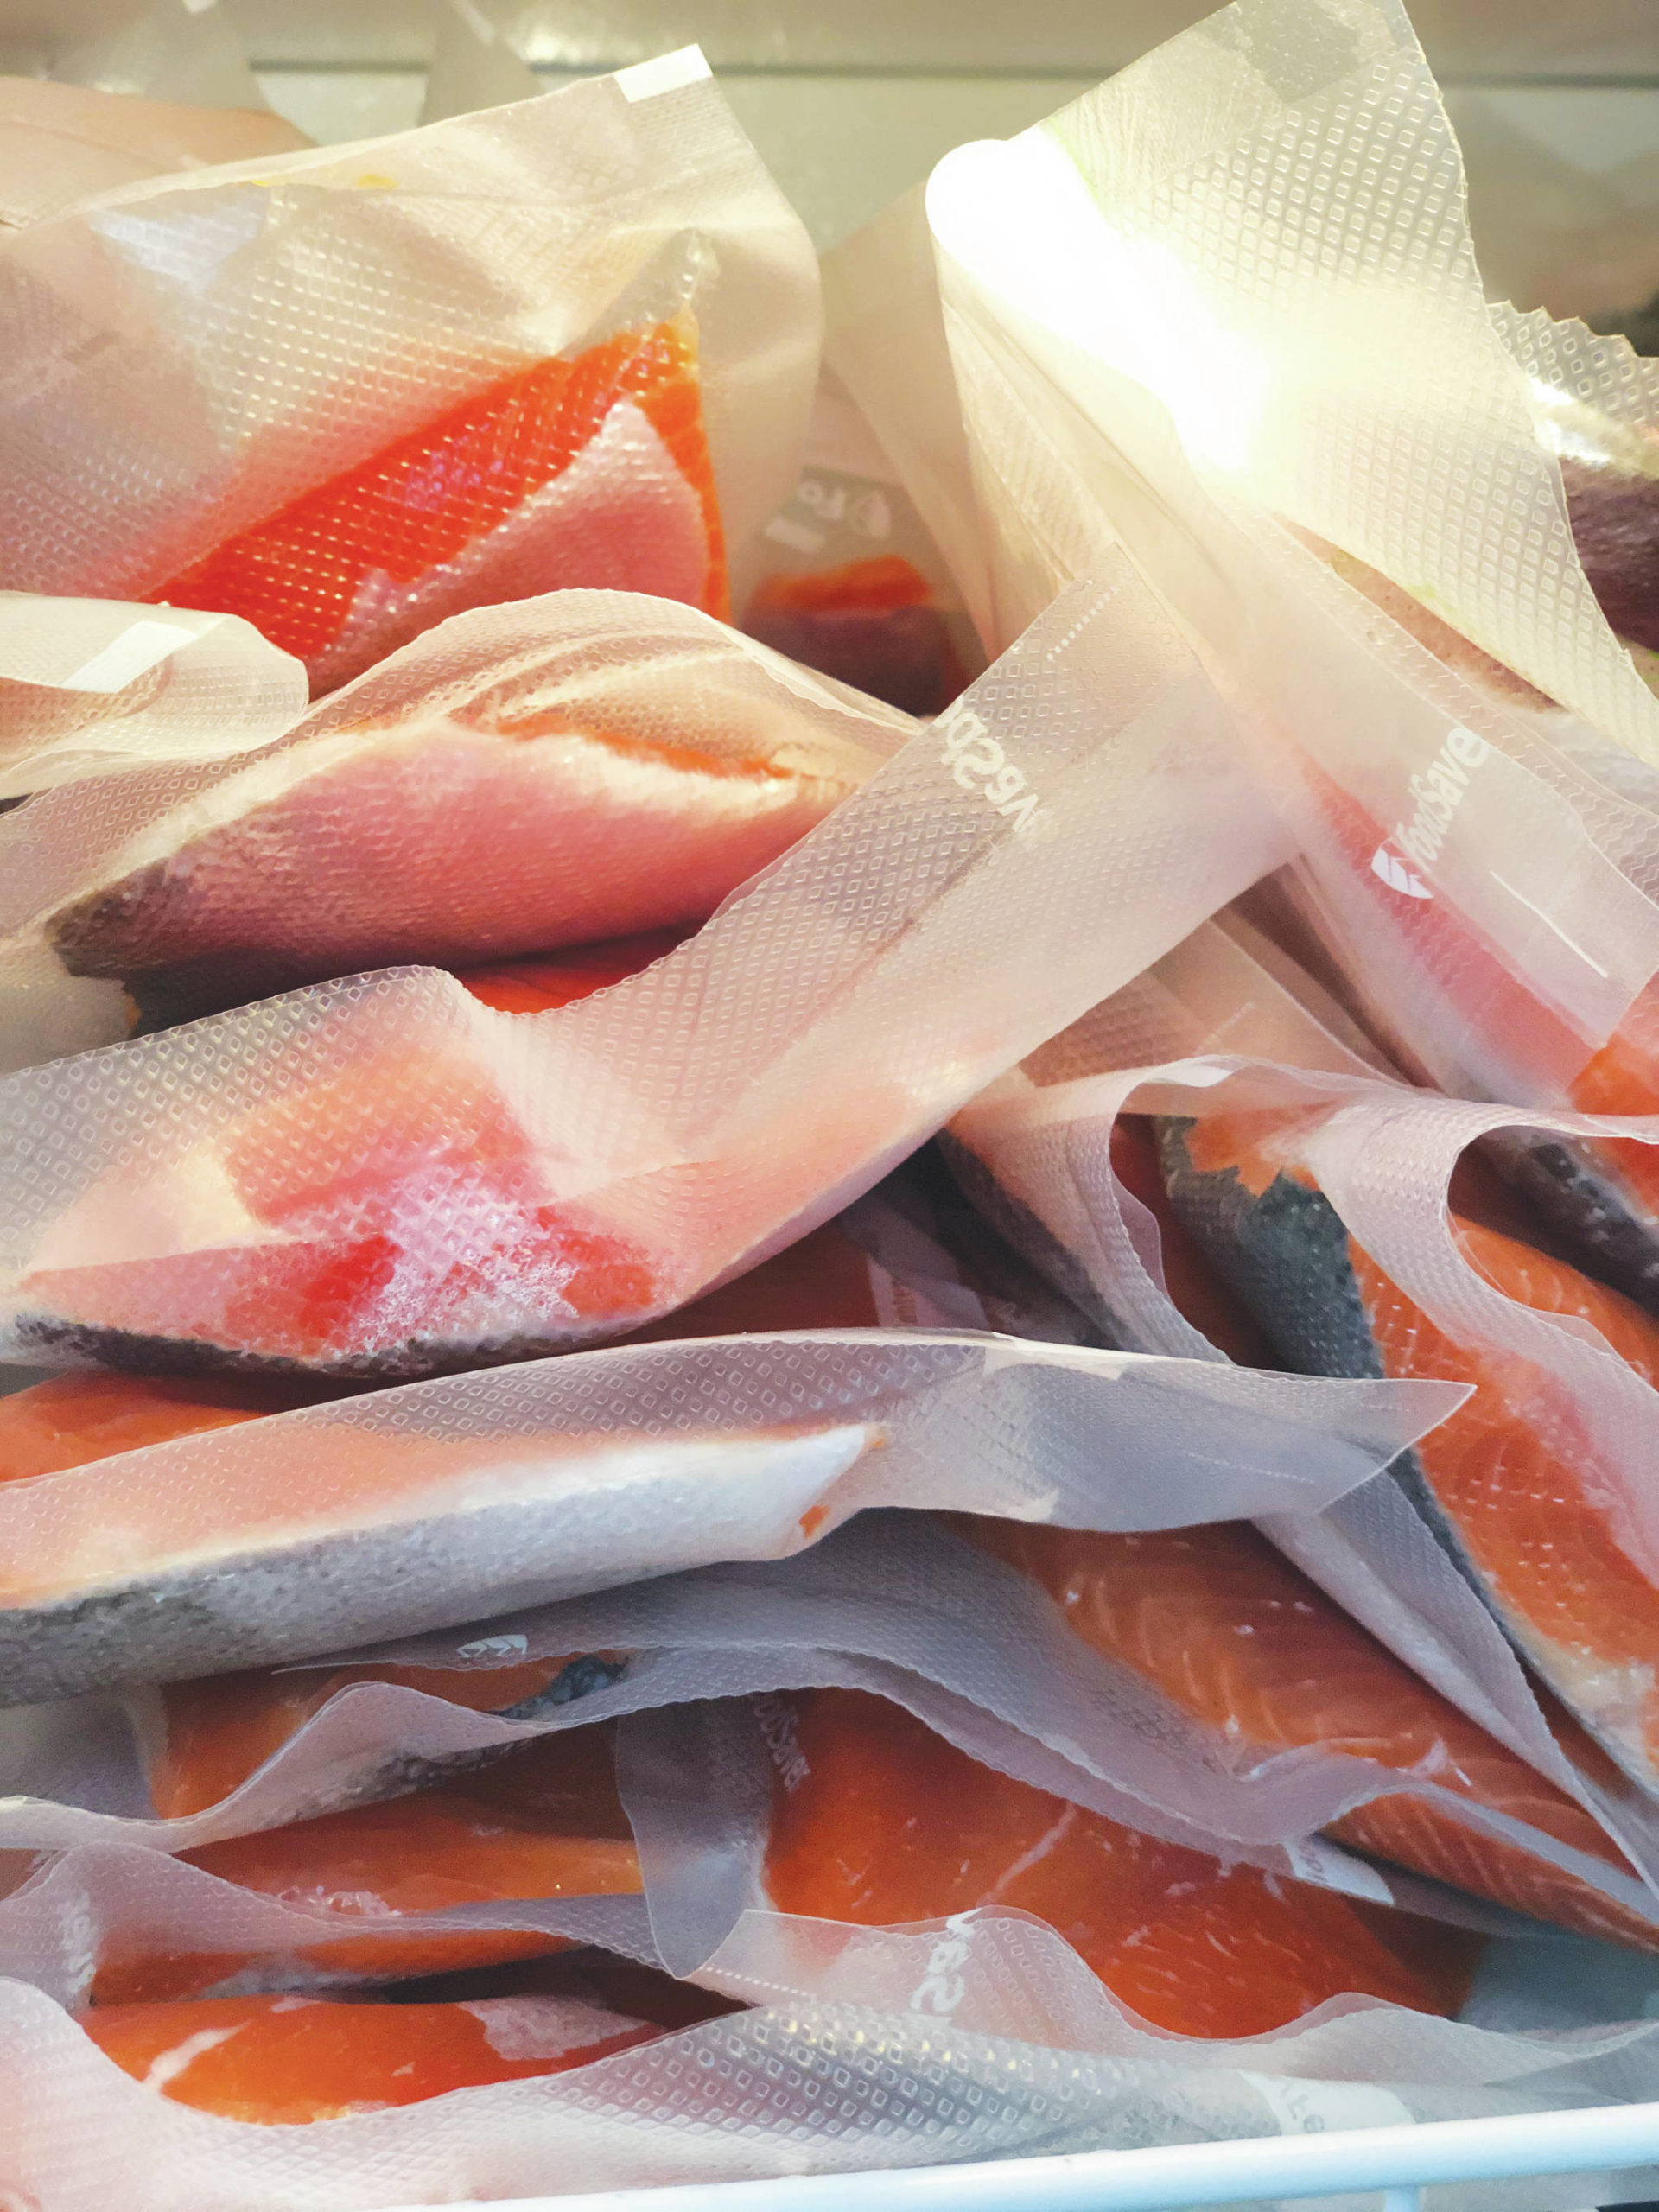 Frozen salmon is pictured in this July 2020 photograph. (Photo by Victoria Petersen/Peninsula Clarion )